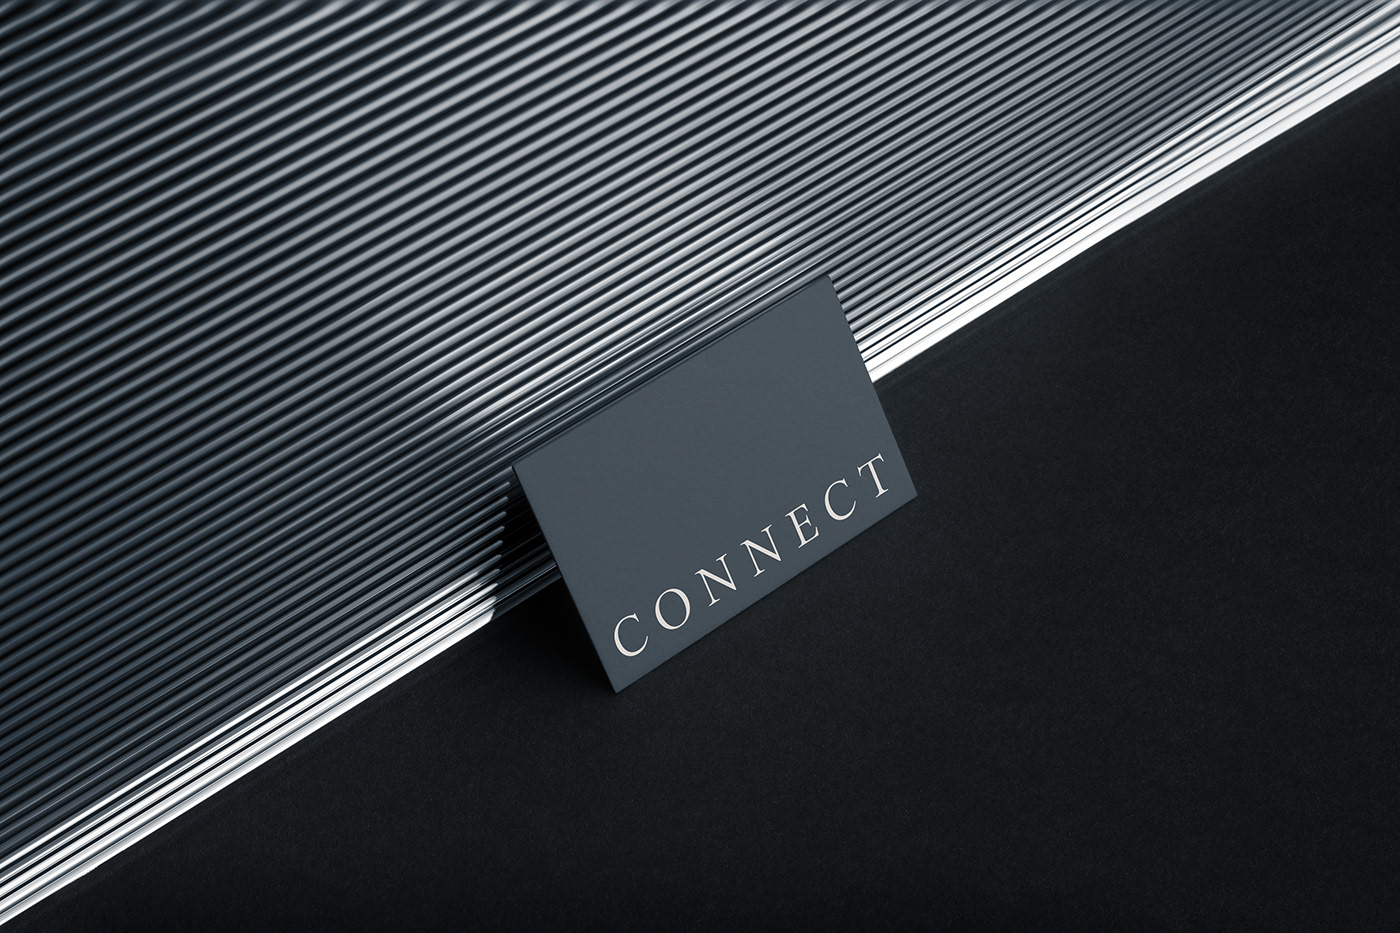 Business card for Connect